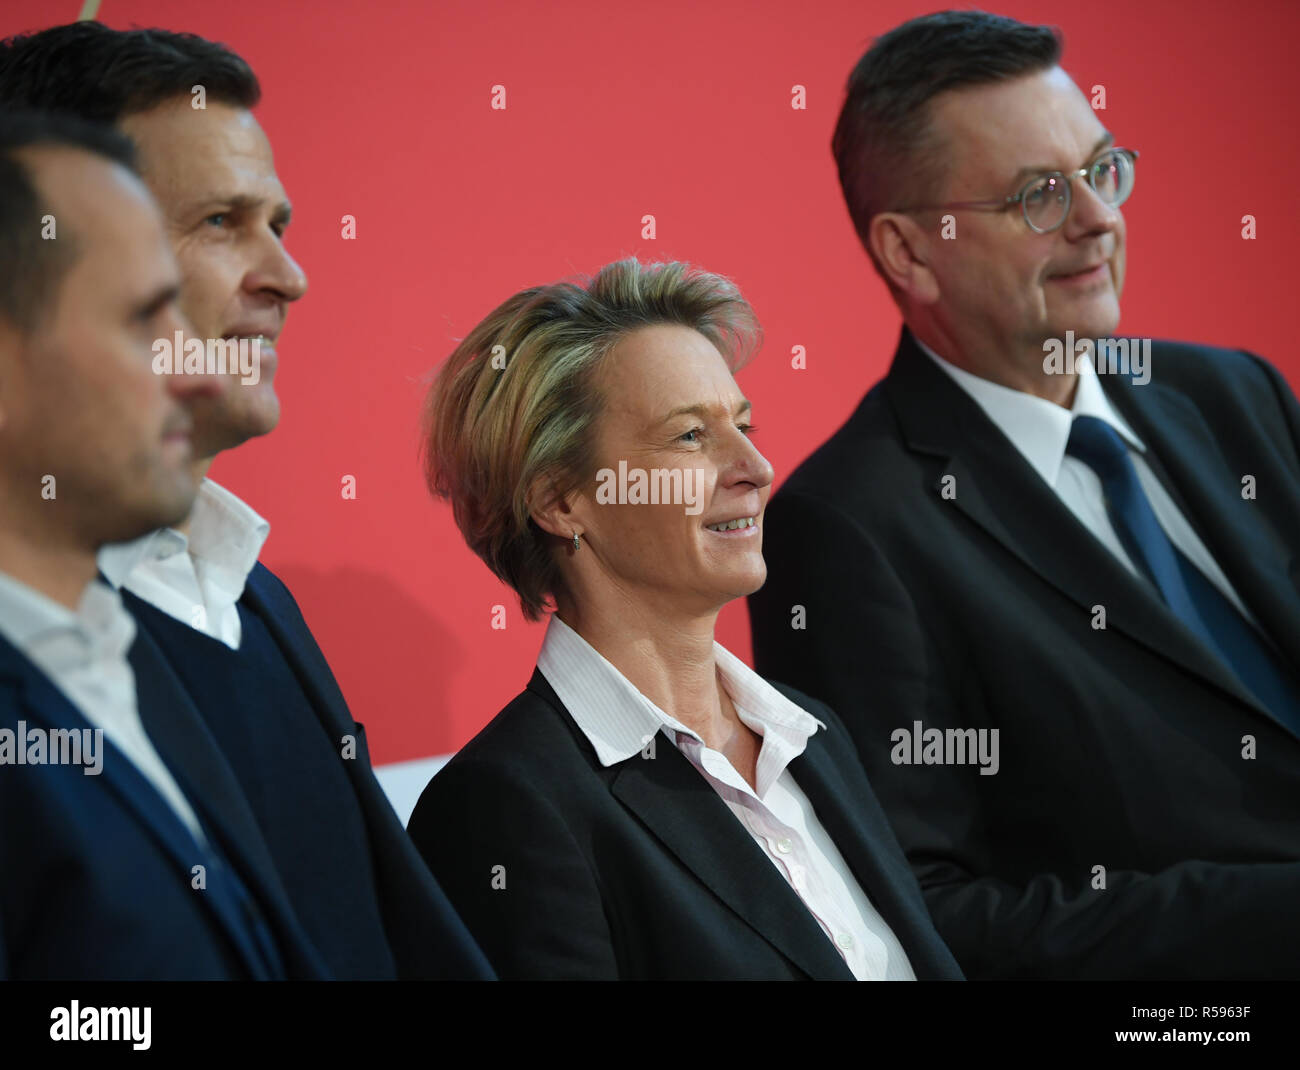 30 November 2018, Hessen, Frankfurt/Main: Joti Chatzialexiou (l-r), Sports Director of the national teams, Oliver Bierhoff, DFB Director National Teams, and Reinhard Grindel, President of the German Football Association (DFB), will take part in the press conference to present Martina Voss-Tecklenburg, the new national coach of the women's national team, at the DFB headquarters. Voss-Tecklenburg was previously coach of the Swiss women's national team and is the successor to Horst Hrubesch. Photo: Arne Dedert/dpa Stock Photo